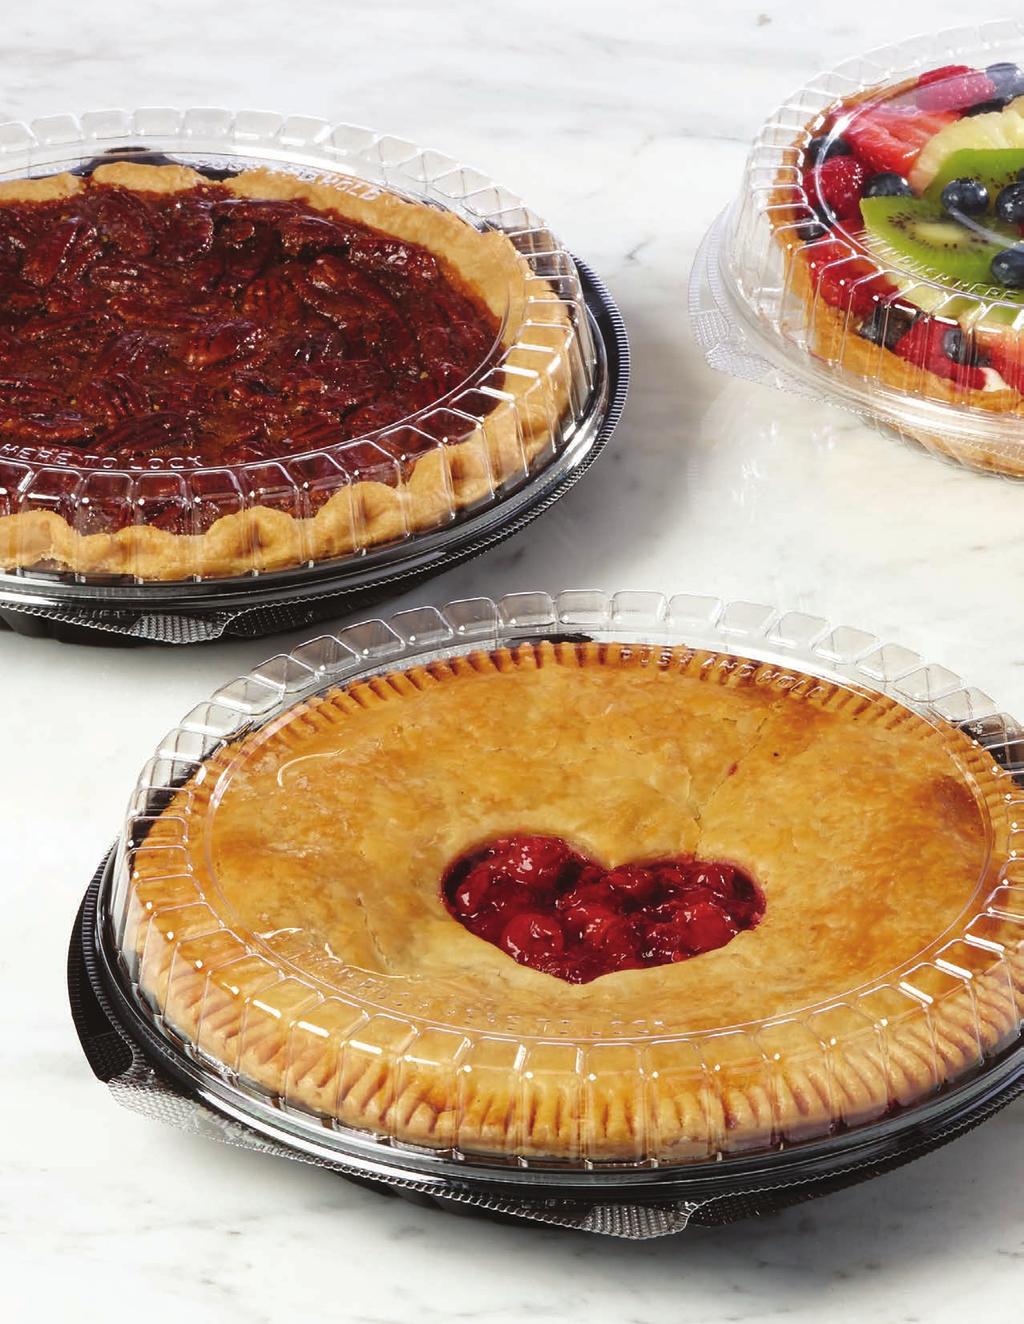 PIE CONTAINERS ELEVATE YOUR CUSTOMERS EXPERIENCE Sabert s pie packaging has a premium look that drives sales.